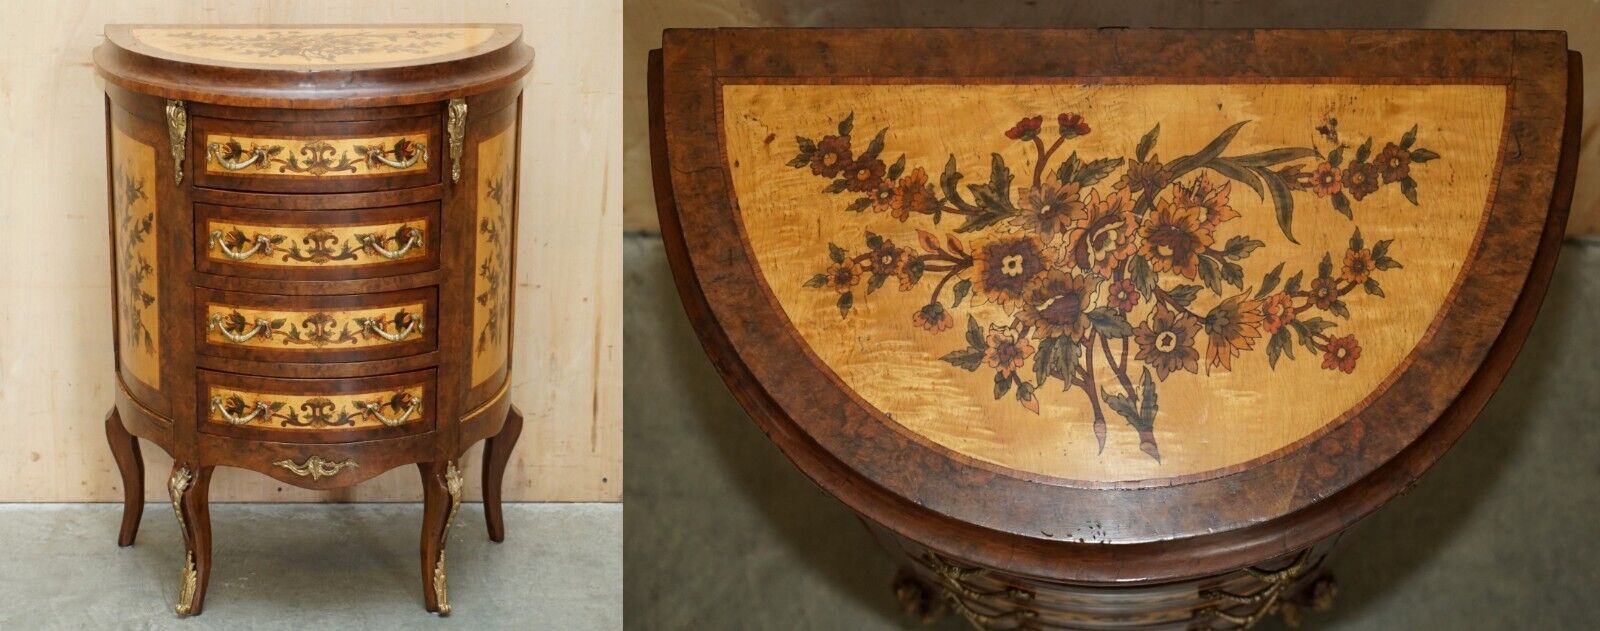 LOVELY FRENCH VINTAGE PAINTED CIRCA 1940'S BURR WALNUT  BRASS DEMI LUNE DRAWERS